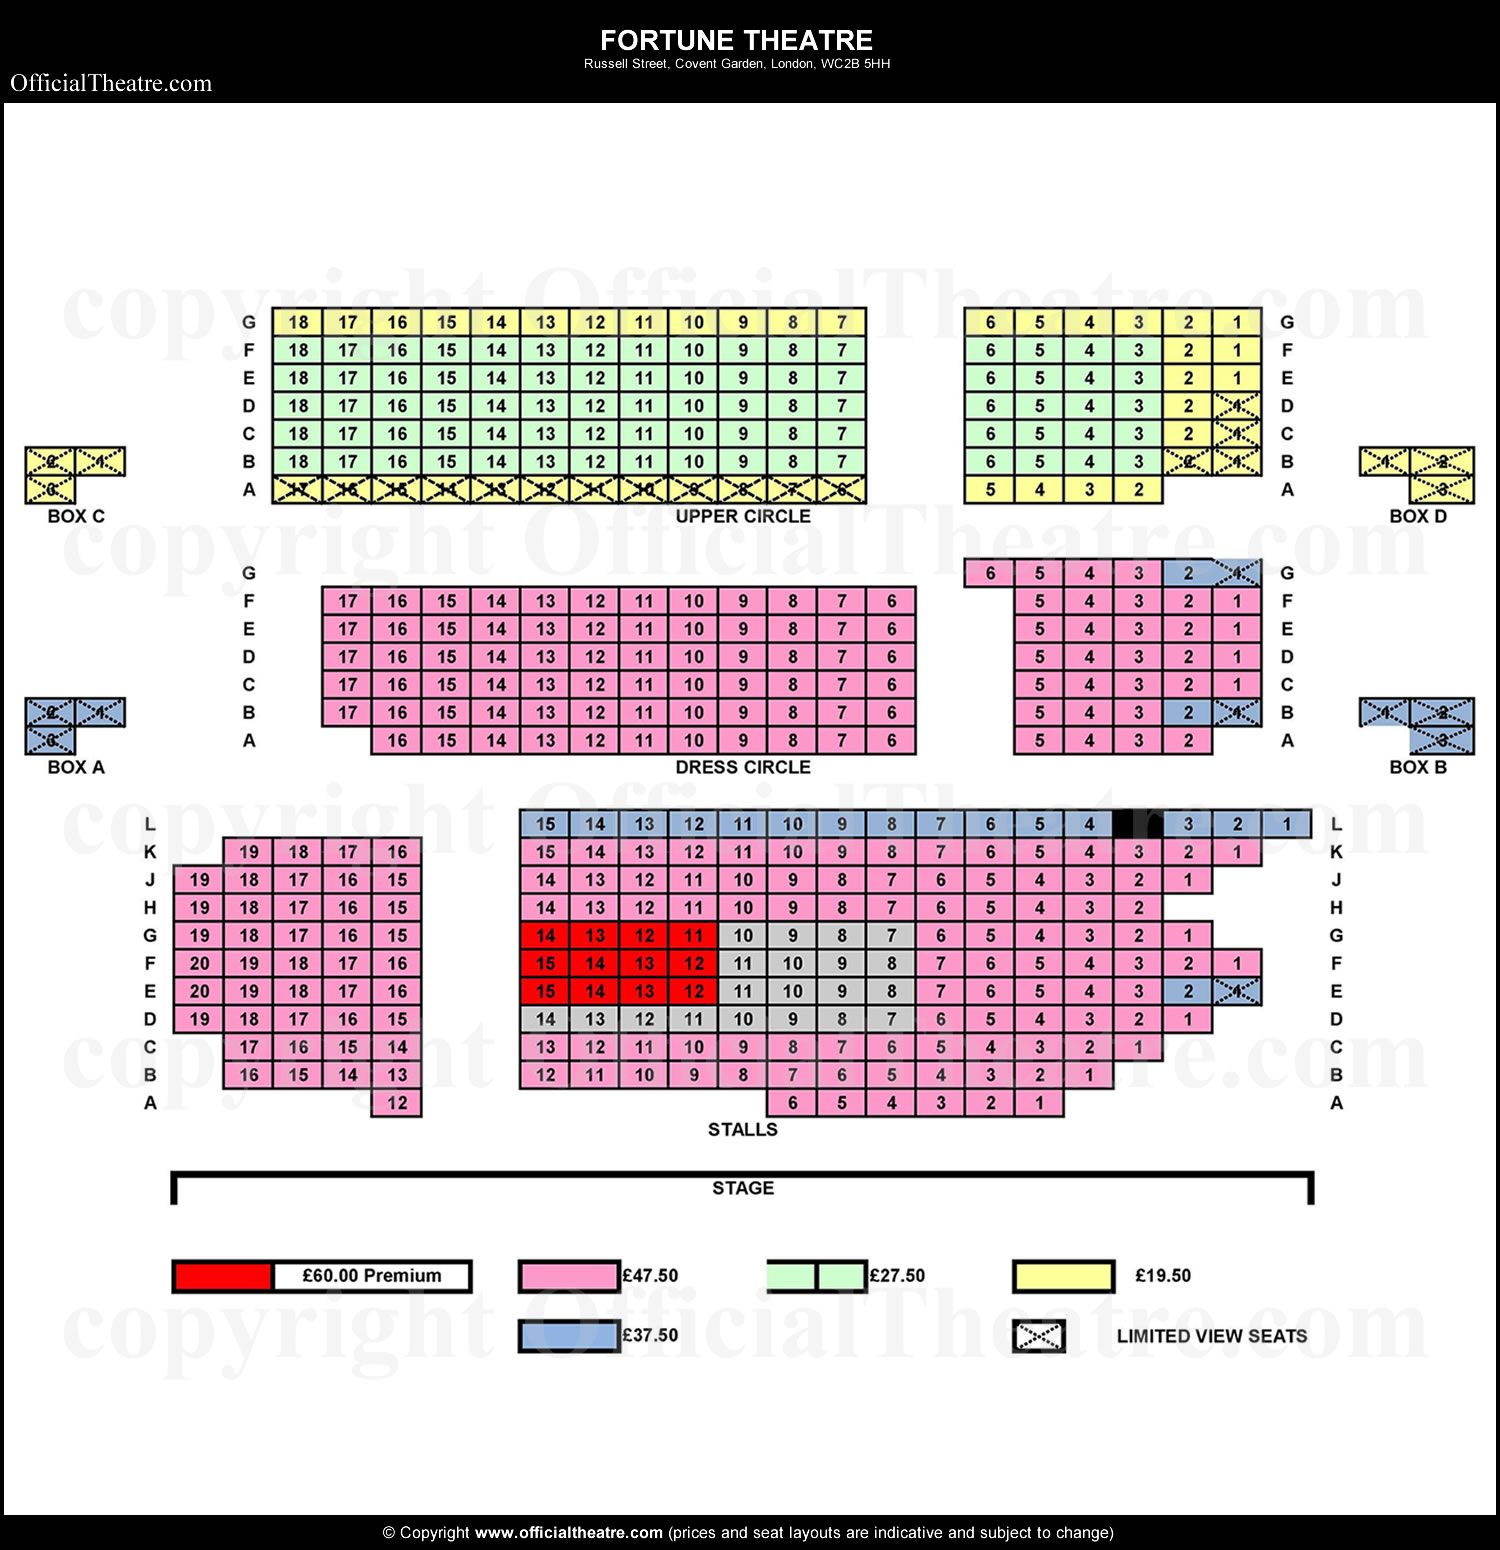 Fortune Theatre seating plan